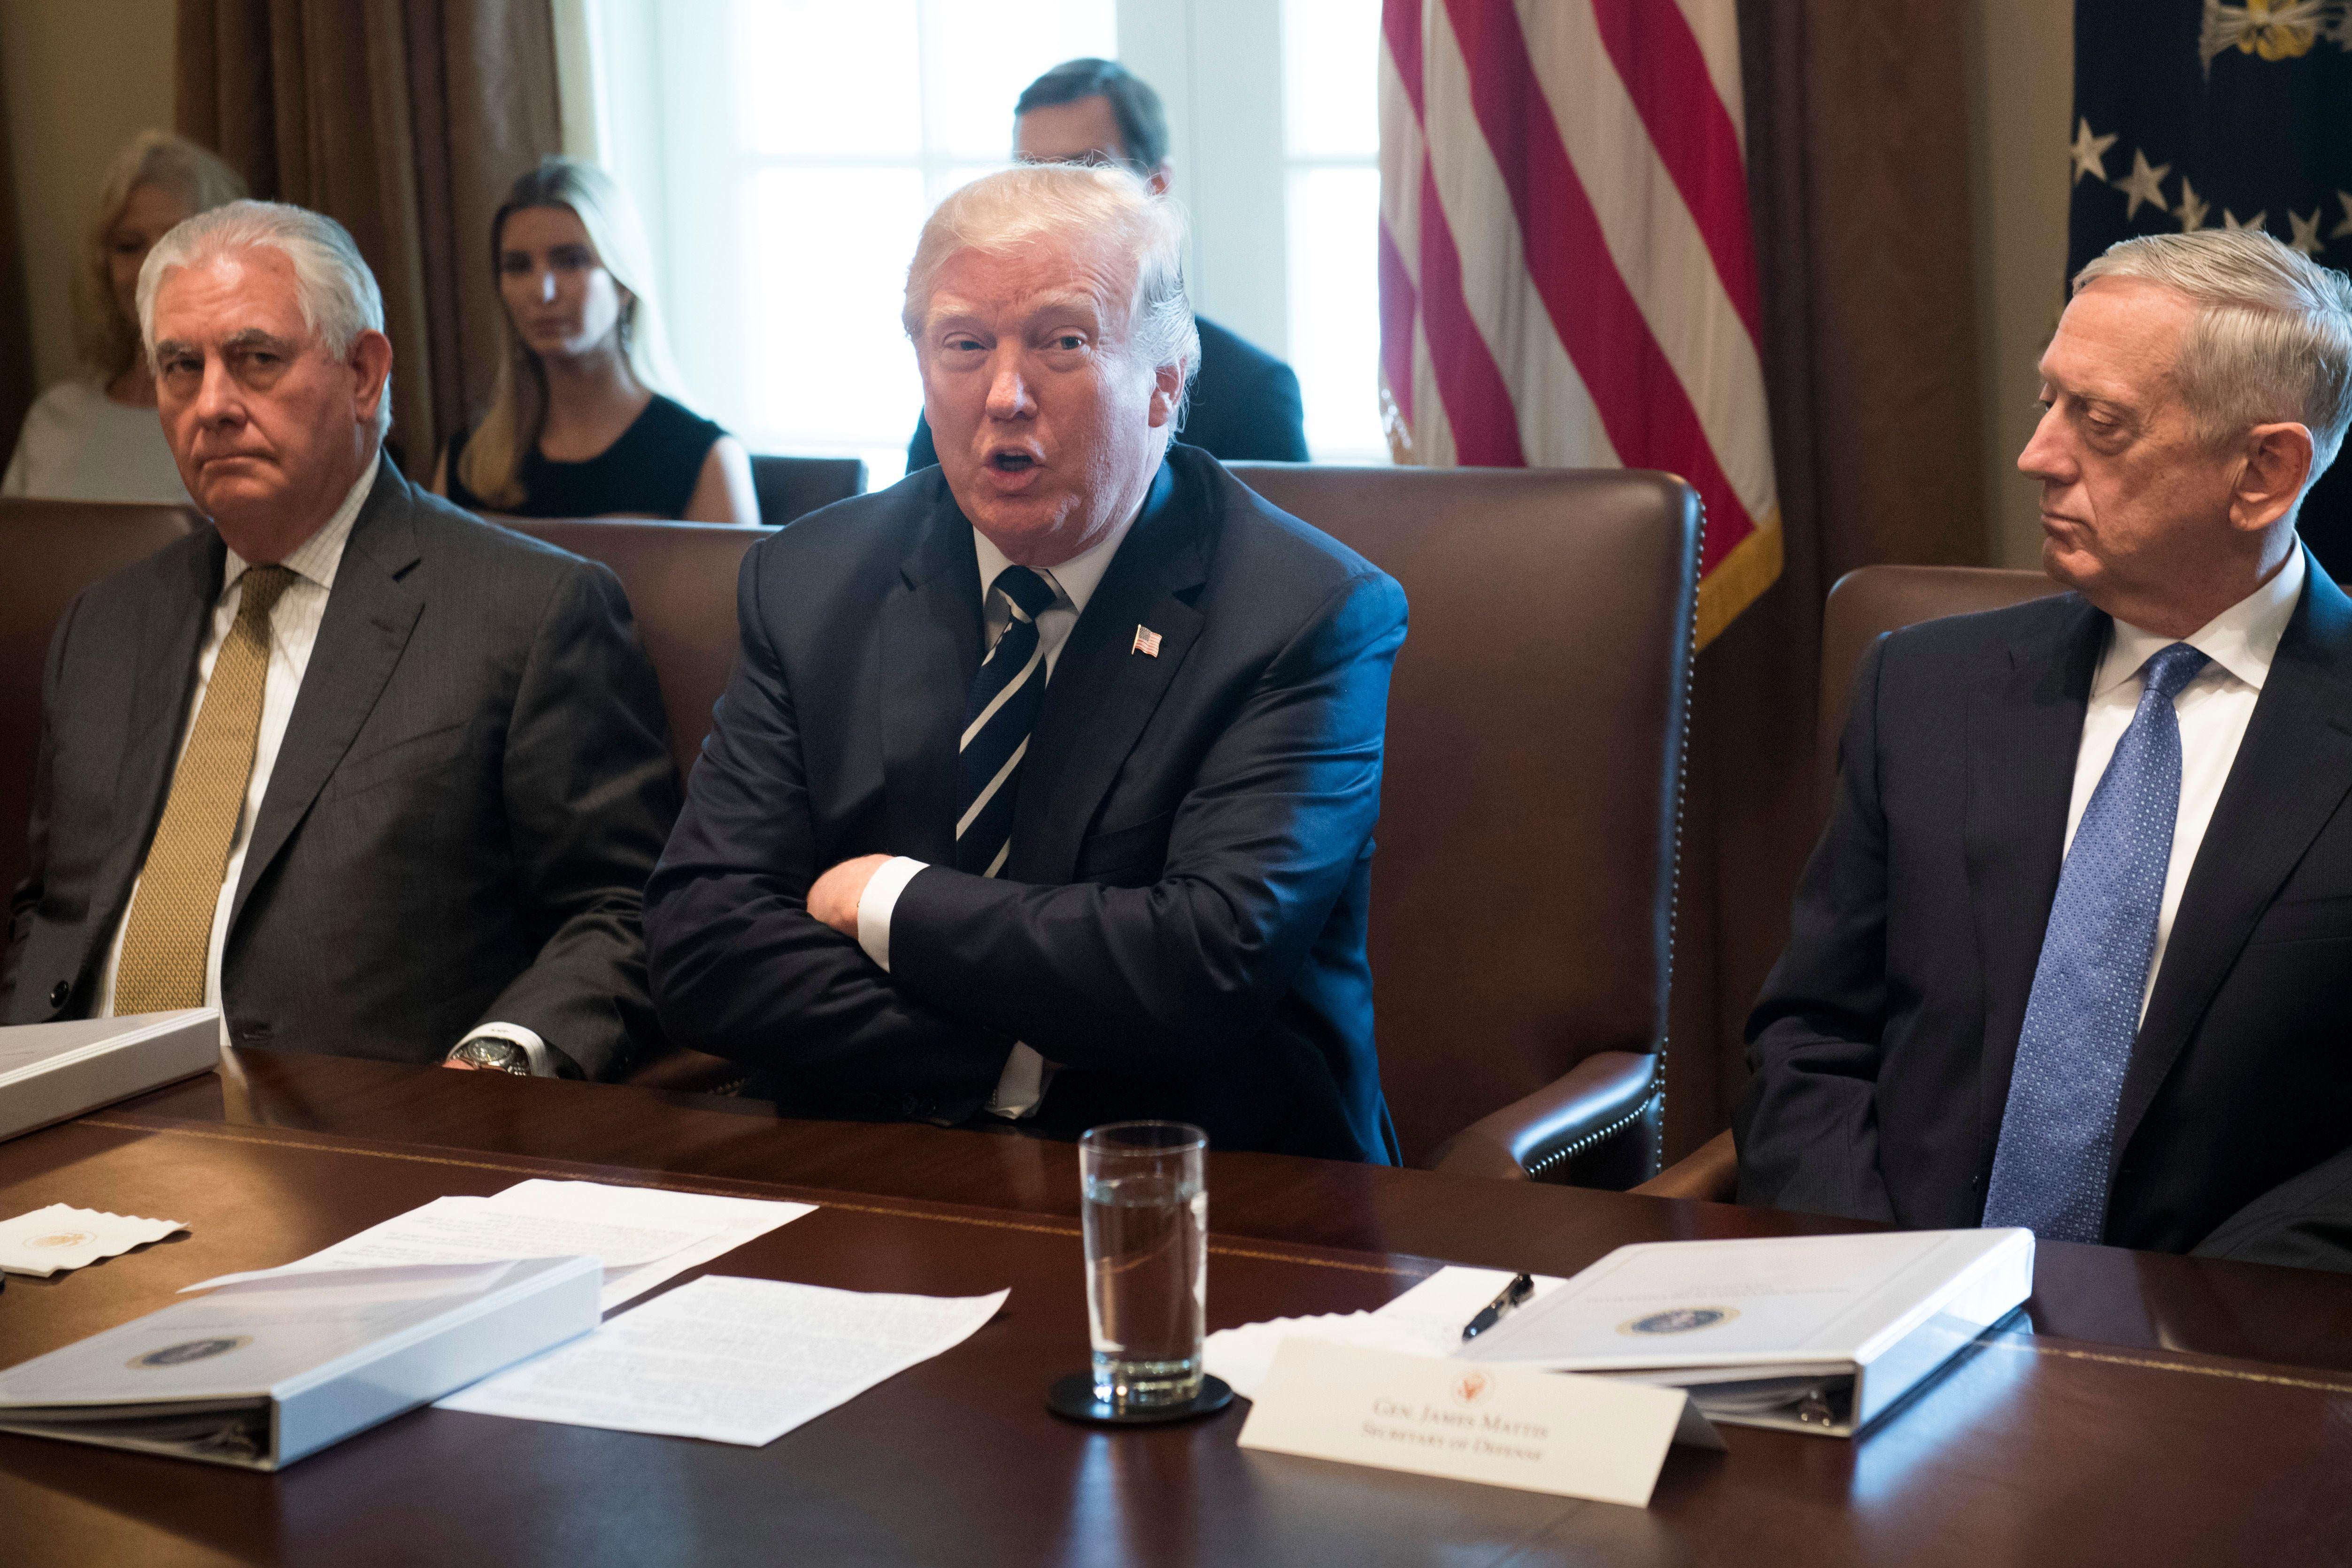 US President Donald Trump speaks (C) alongside Secretary of State Rex Tillerson (2L) and Secretary of Defense James Mattis during a Cabinet Meeting in the Cabinet Room of the White House in Washington, DC, October 16, 2017. / AFP PHOTO / SAUL LOEB        (Photo credit should read SAUL LOEB/AFP/Getty Images)